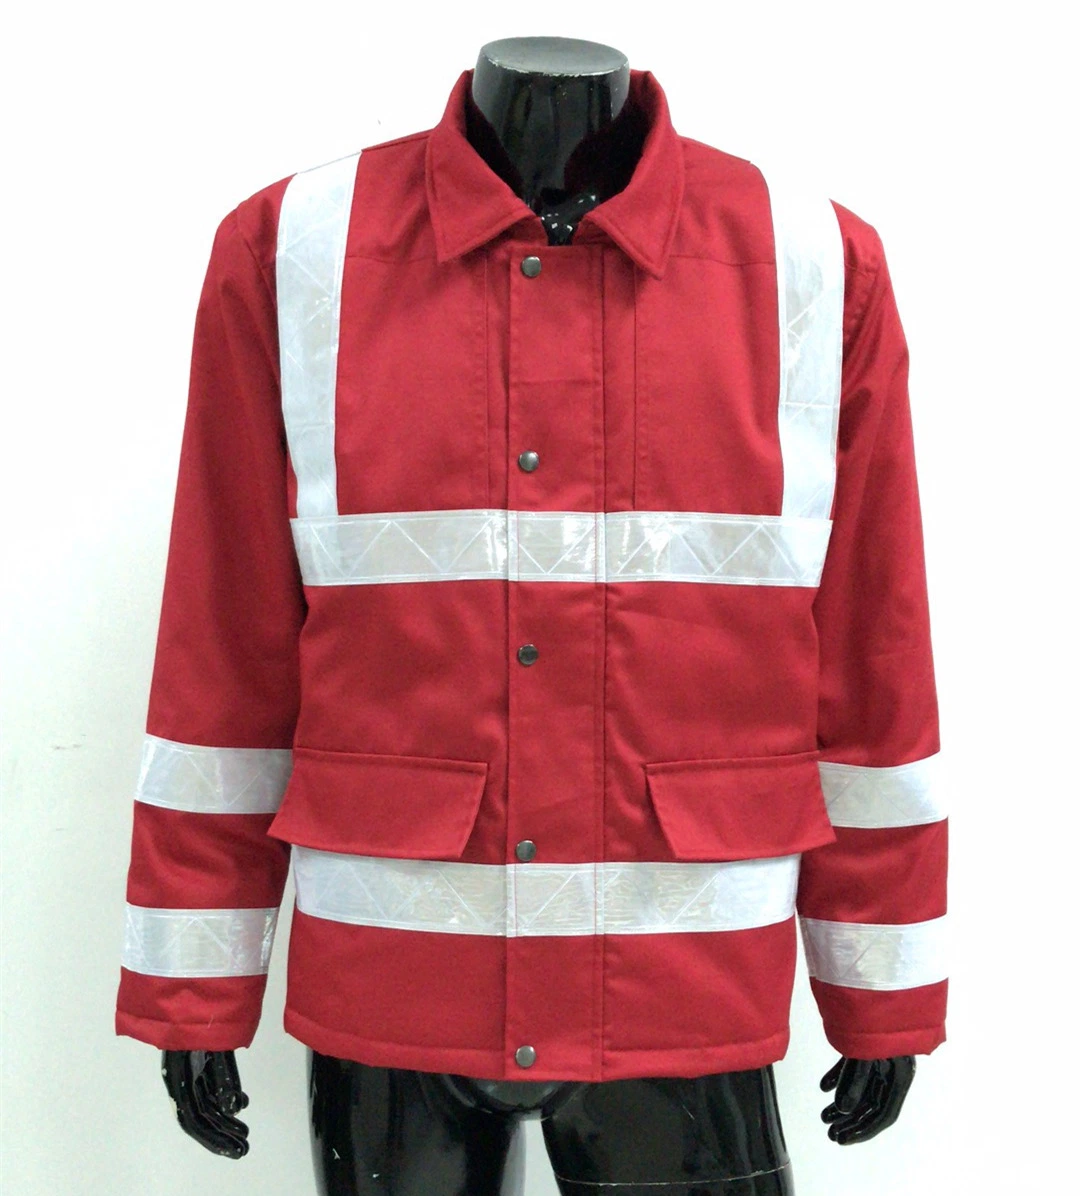 Hi-Vis Workwear 3m Reflective Tape Safety Clothing 100% Cotton Shirt Fire Resistant Work Uniforms